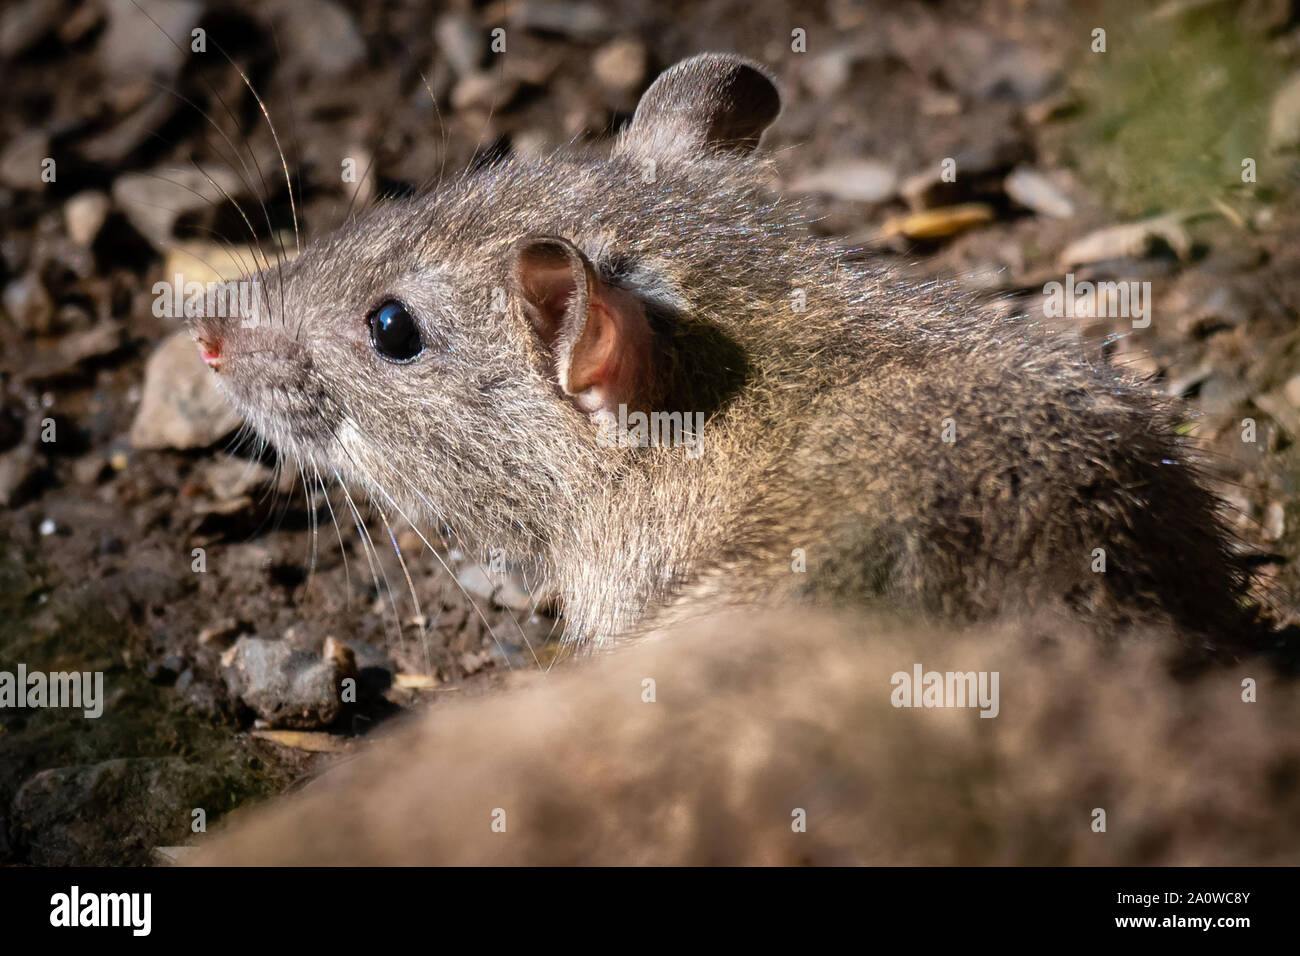 A very close up portrait of a rat emerging from behind a rock. It is an image of half its body with the head and eye showing Stock Photo